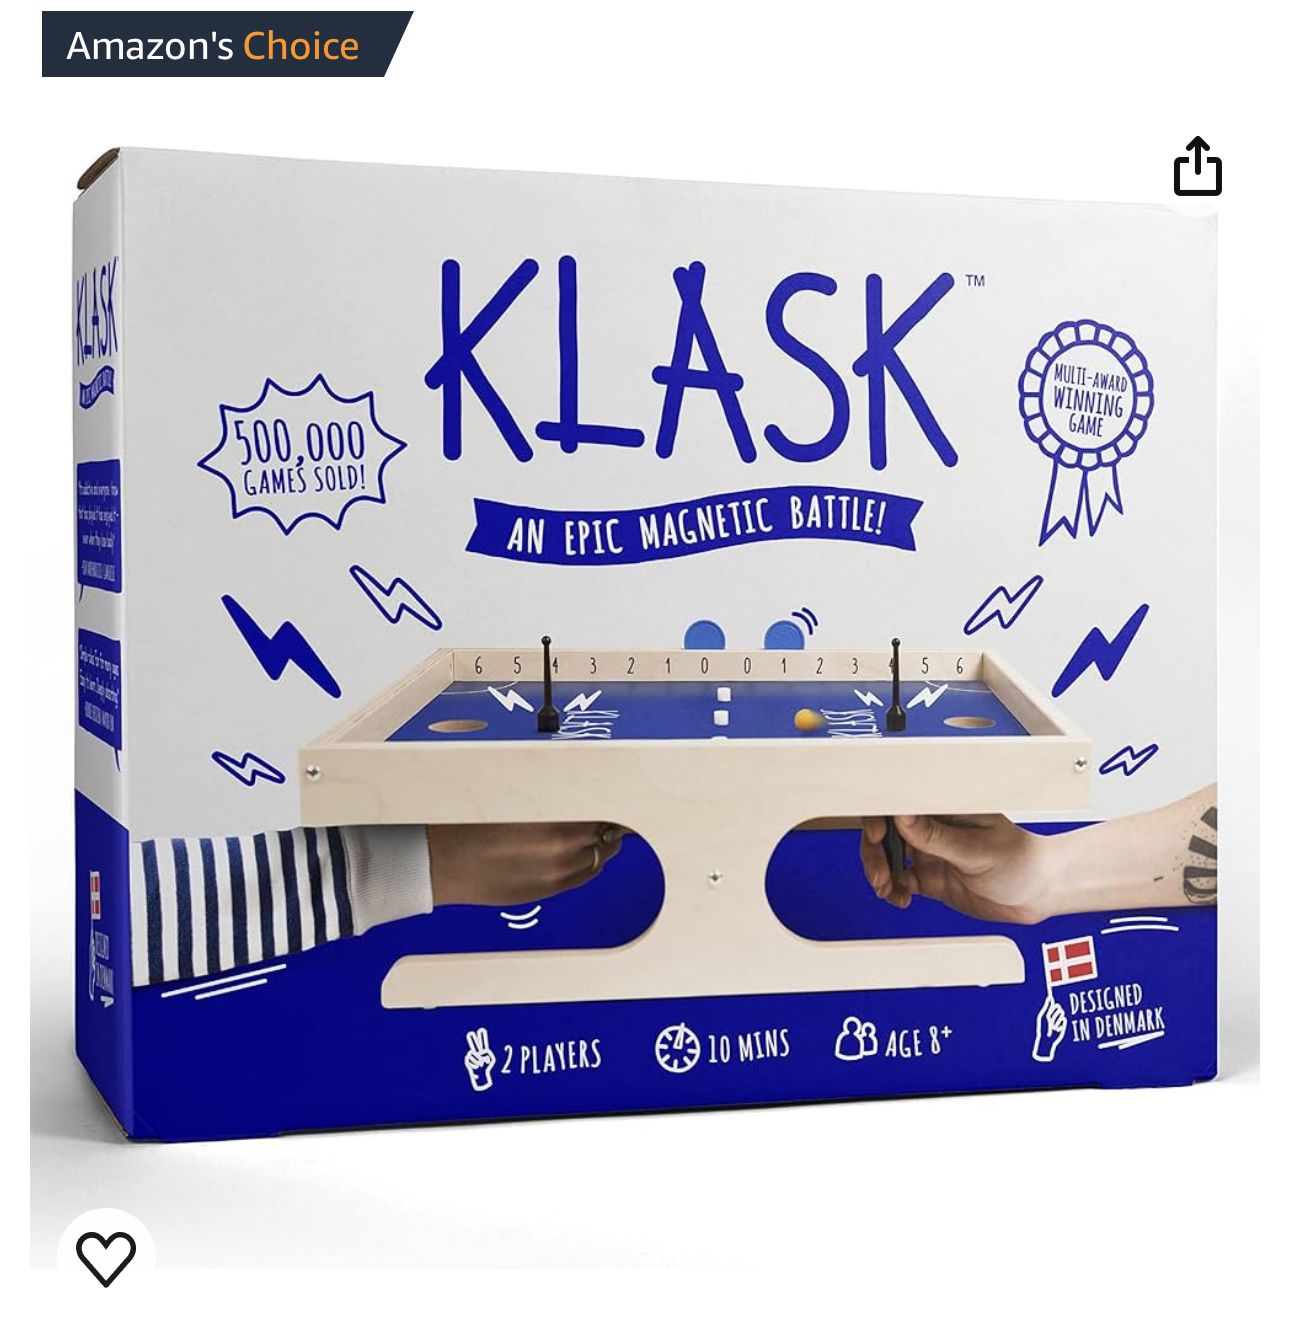 #1 PART GAME IN SWEDEN AND NORWAY. KLASK game GREAT FOR EVERYONE